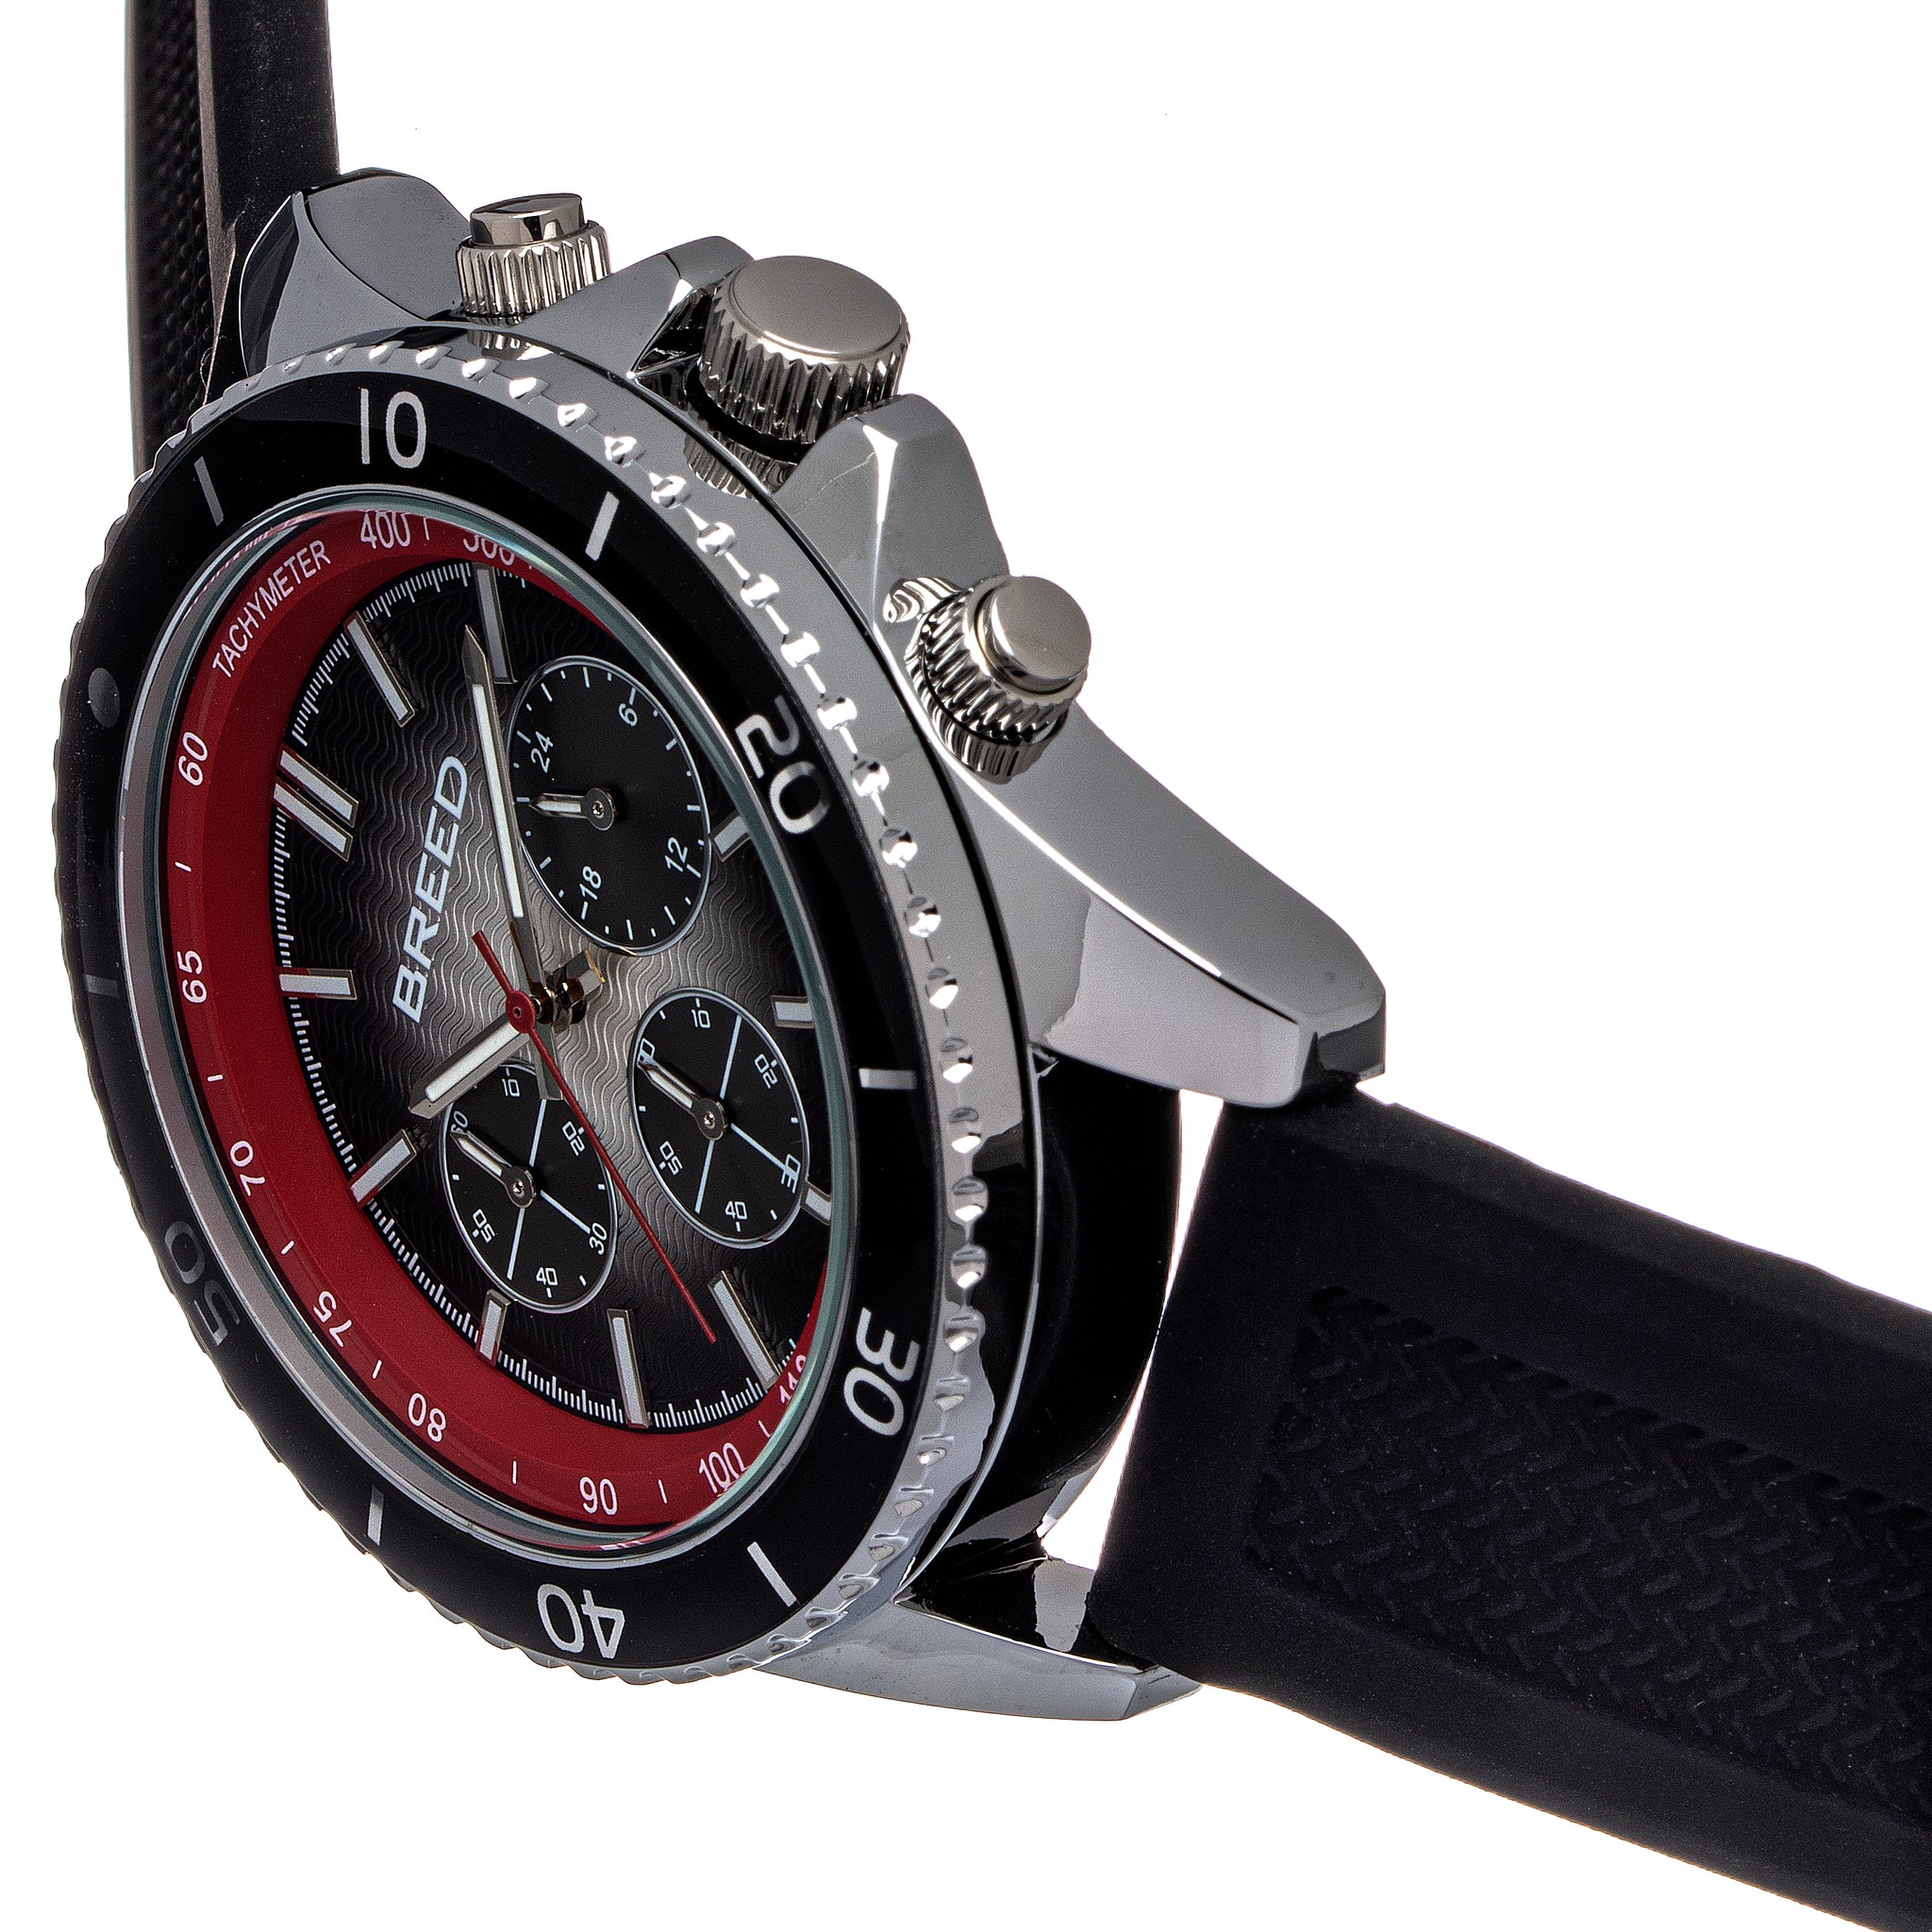 Breed Tempo Chronograph Strap Watch - Black/Red - BRD9104